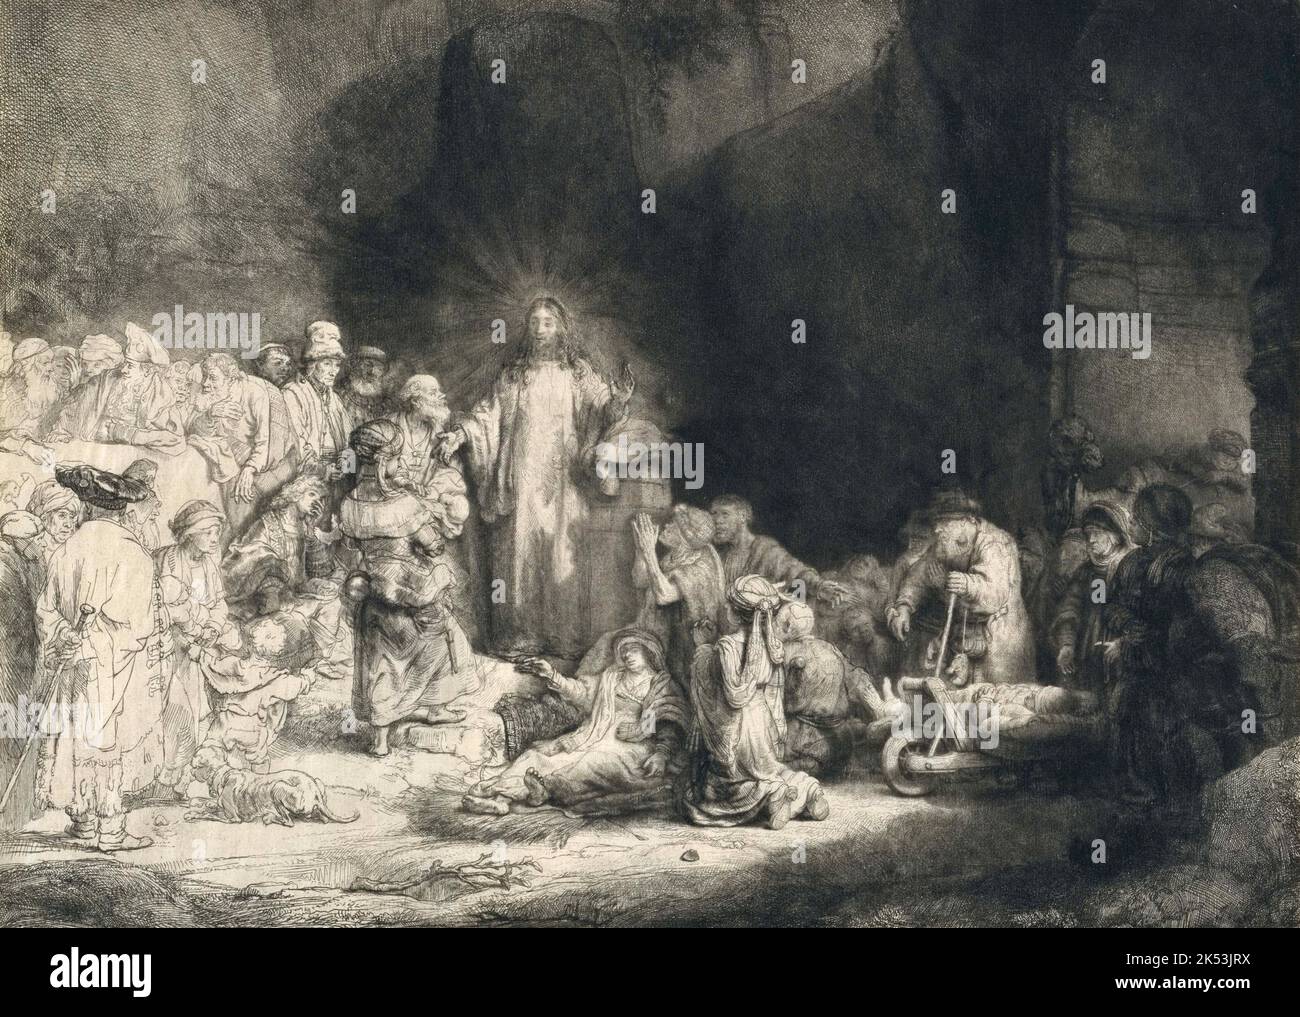 The Hundred Guilder Print is an etching by Rembrandt. The etching's popular name derives from the large sum of money supposedly once paid for an example. It is also called Christ healing the sick, Christ with the Sick around Him, Receiving Little Children, or Christ preaching Stock Photo